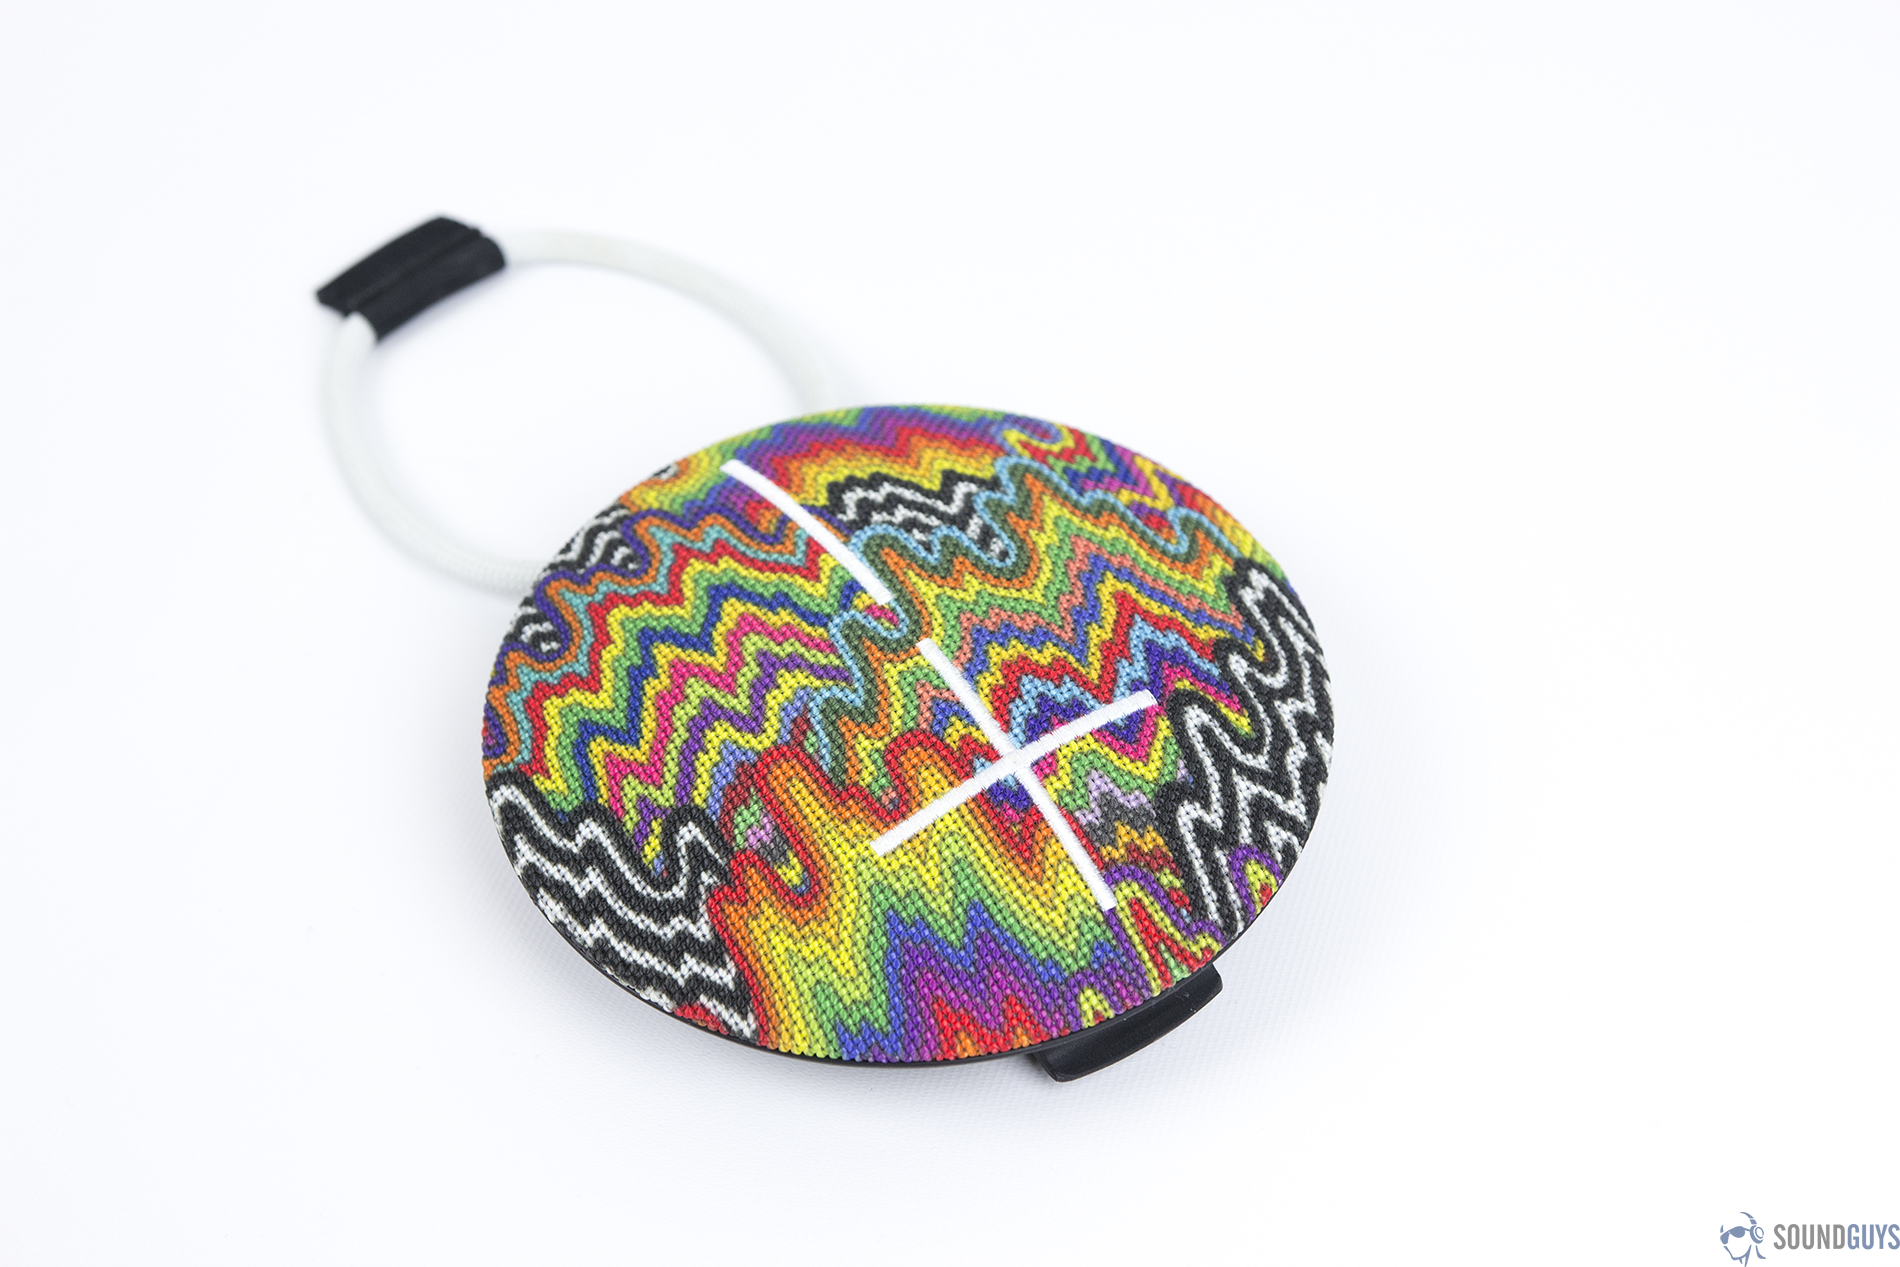 An angled, overhead view of a rainbow-patterned UE Roll 2 on a white background.